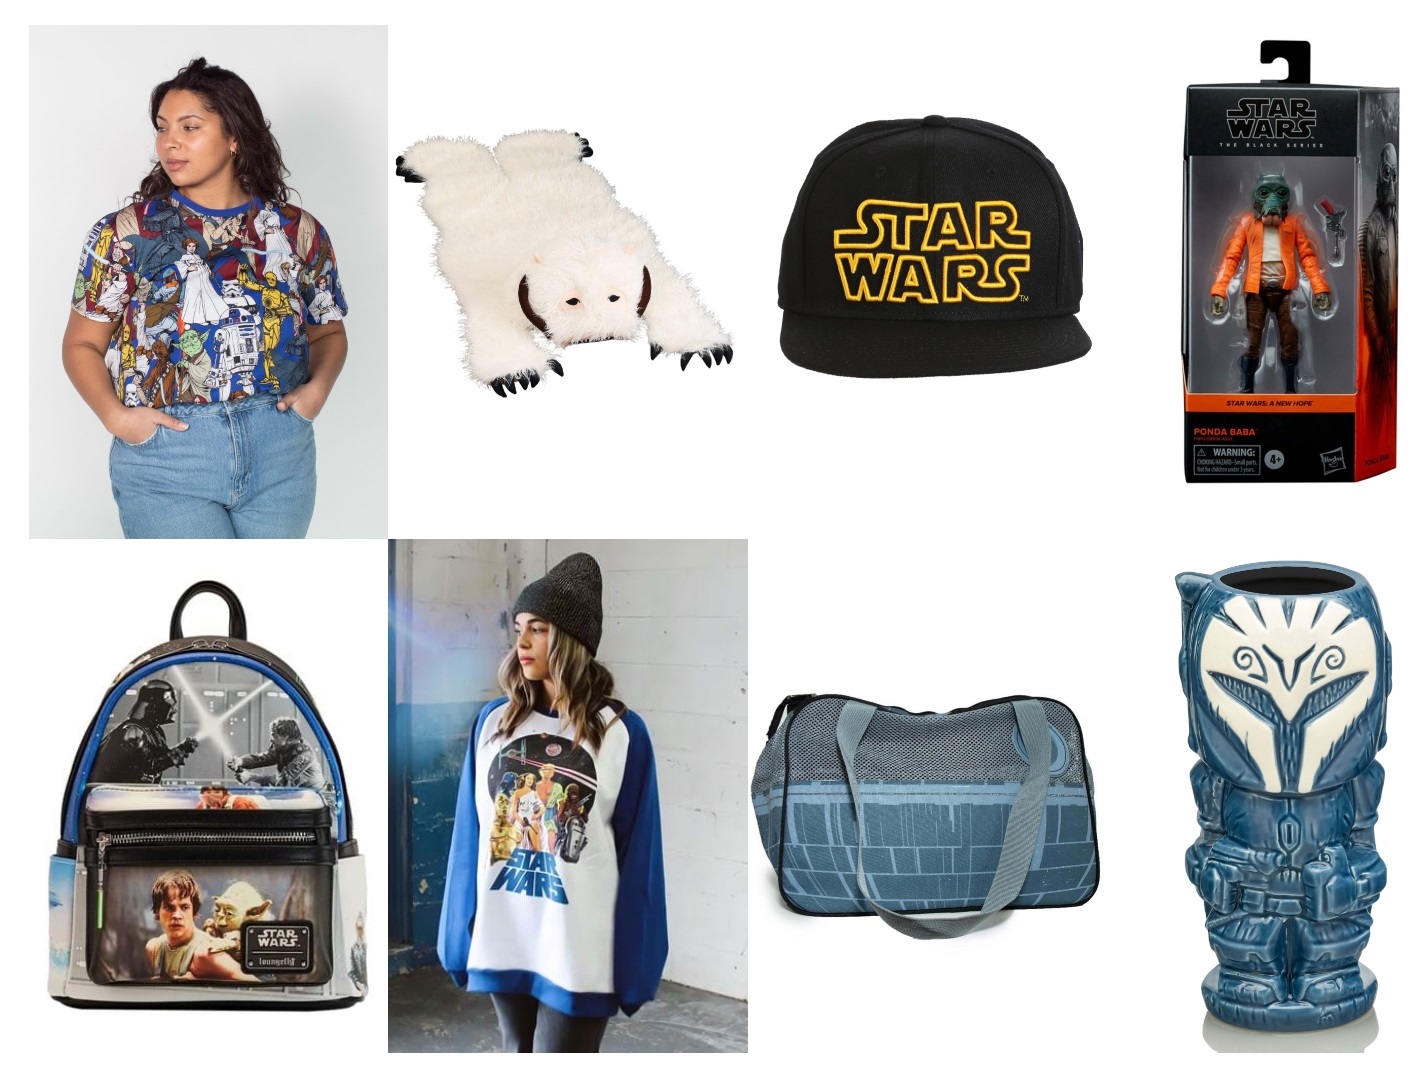 Other Star Wars Gifts